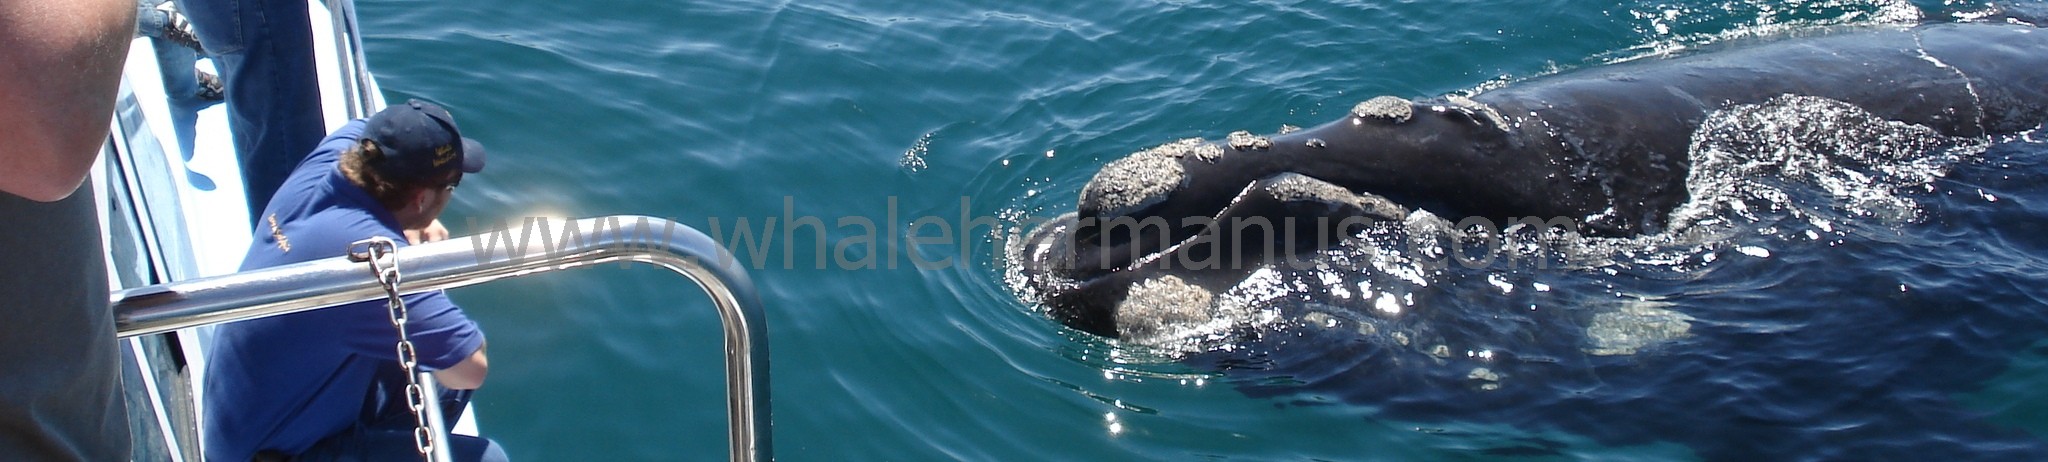 Whale watching boat trips in Hermanus, South Africa